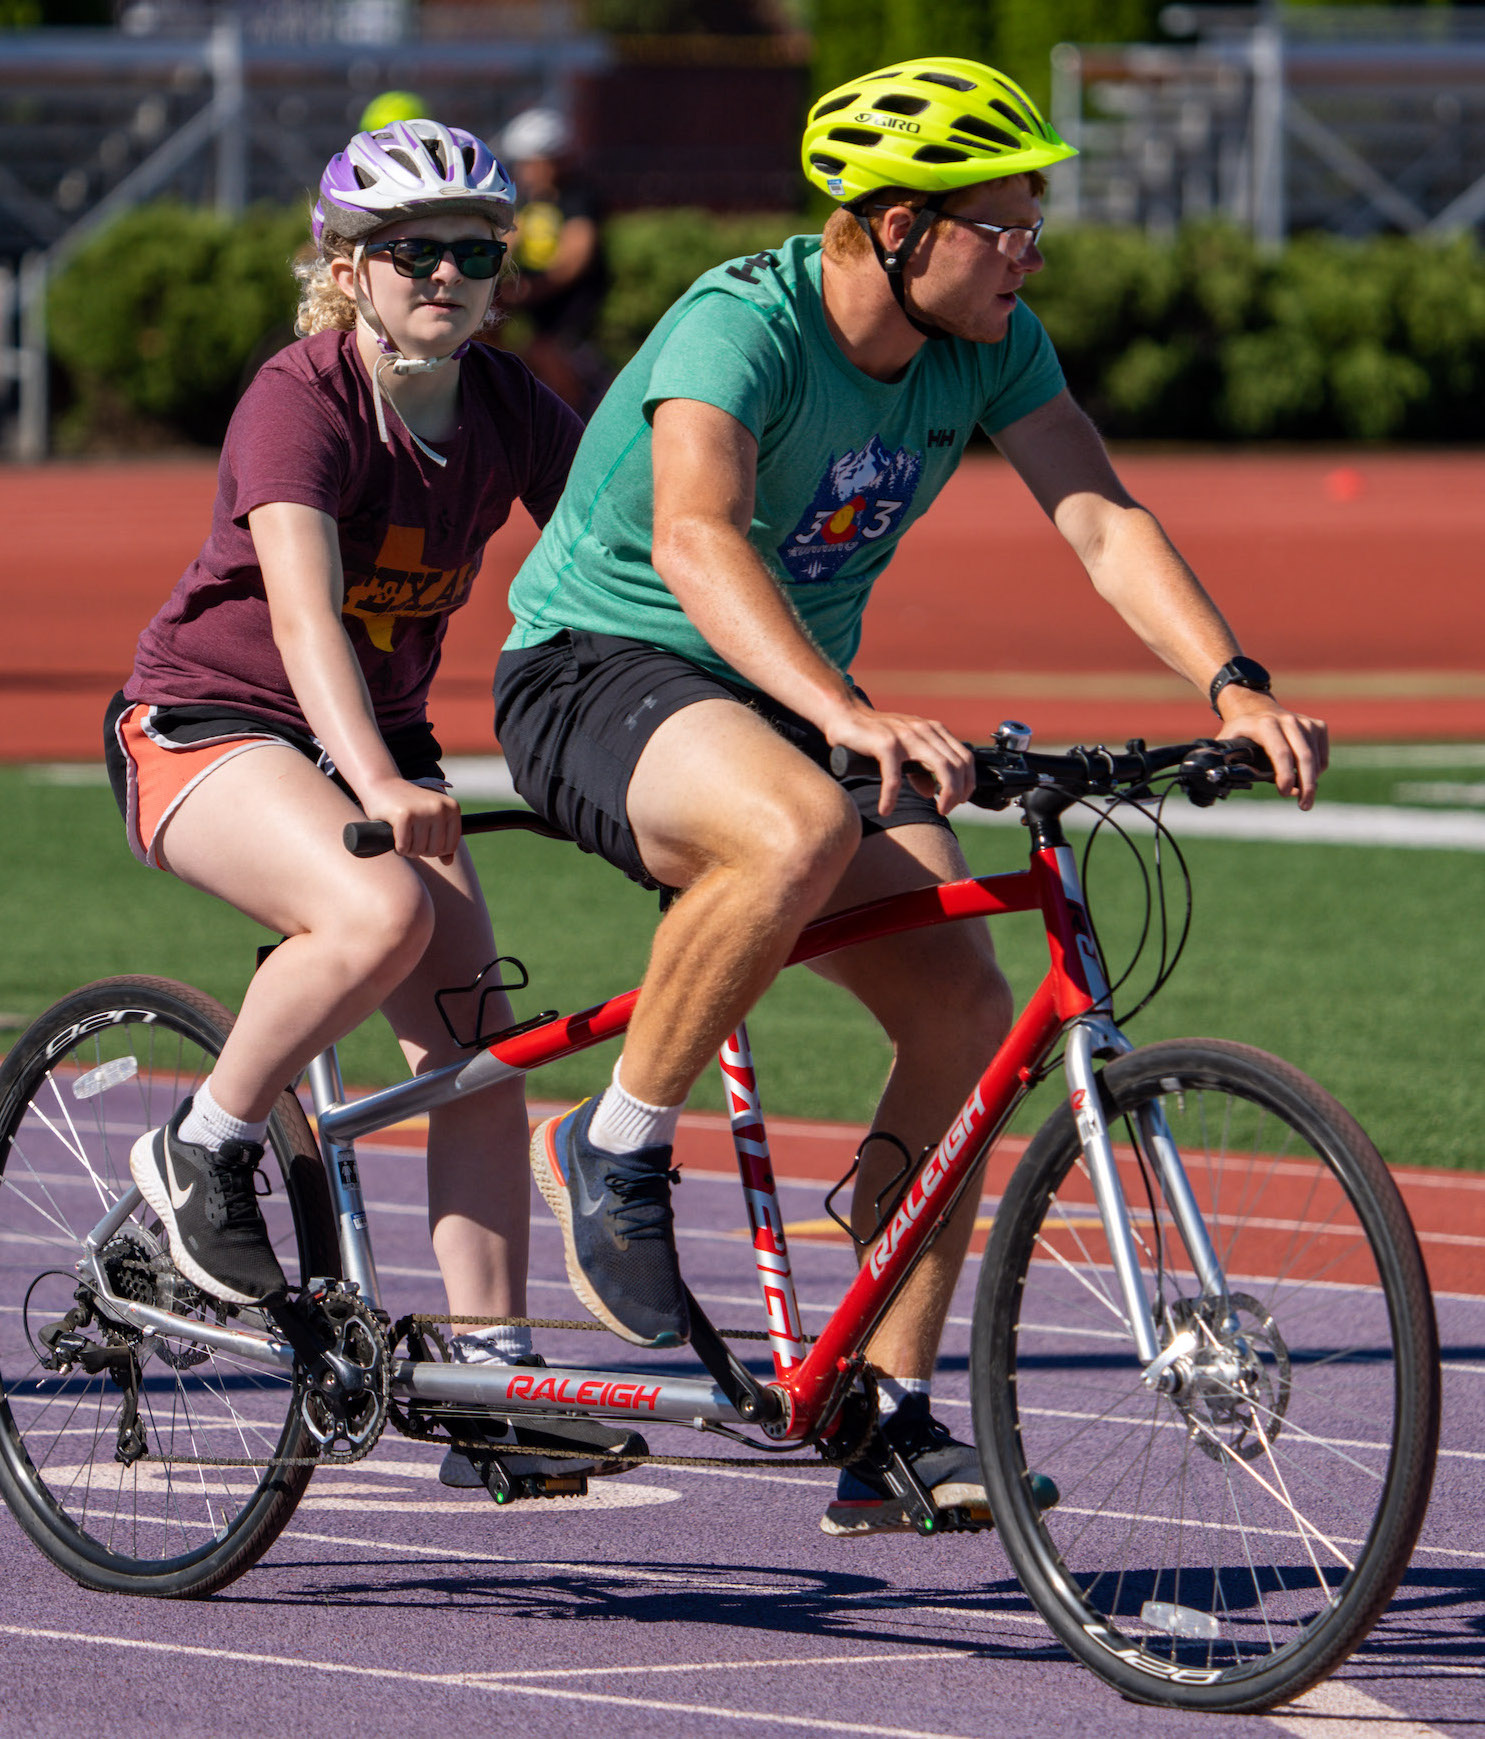 Young athlete, Alaina, riding on the back of a red tandem bicycle with her guide in the front seat. Alaina is wearing a burgundy tshirt, orange shorts and a white helmet.